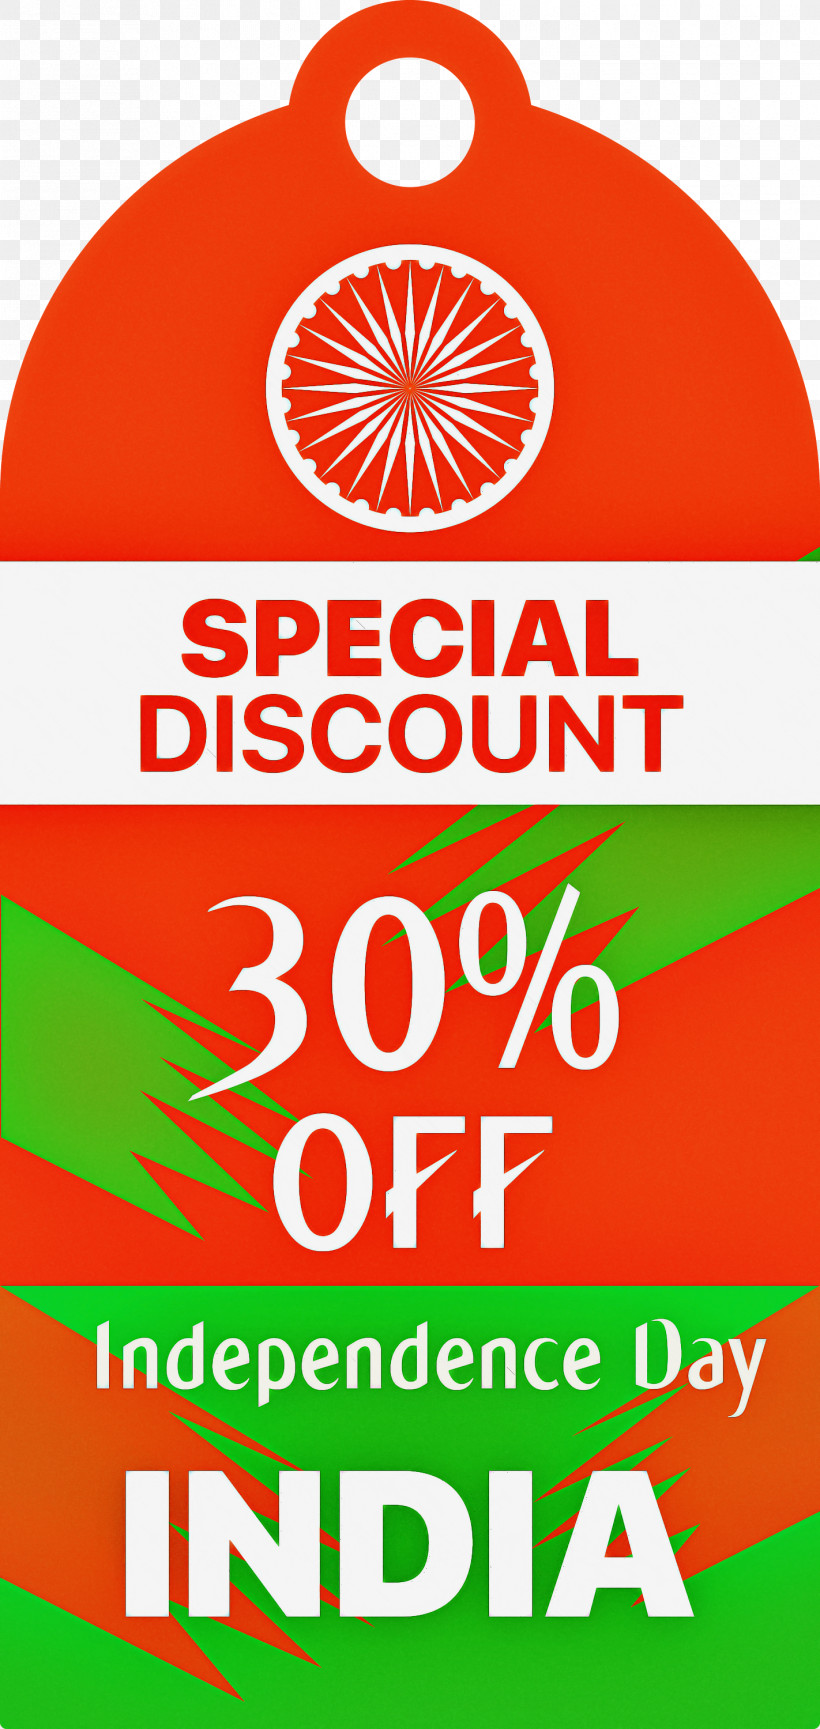 India Indenpendence Day Sale Tag India Indenpendence Day Sale Label, PNG, 1422x3000px, India Indenpendence Day Sale Tag, Area, India, India Indenpendence Day Sale Label, Indian Independence Day Download Free